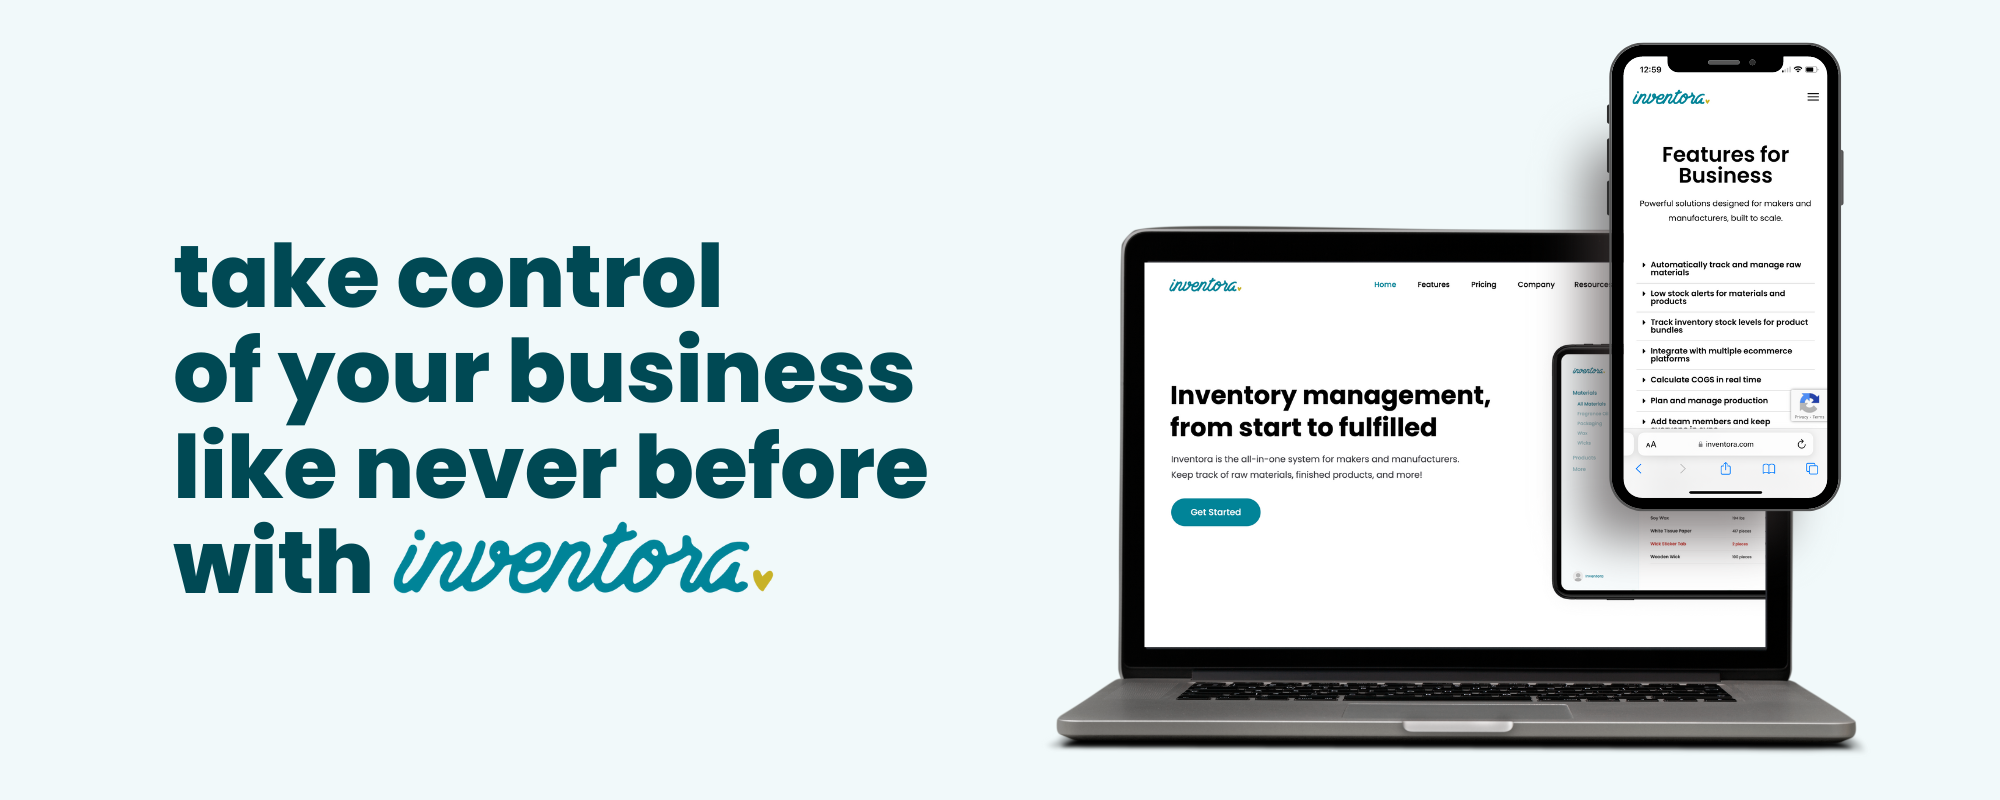 "Take control of your business like never before with Inventora"; laptop and smartphone showing website